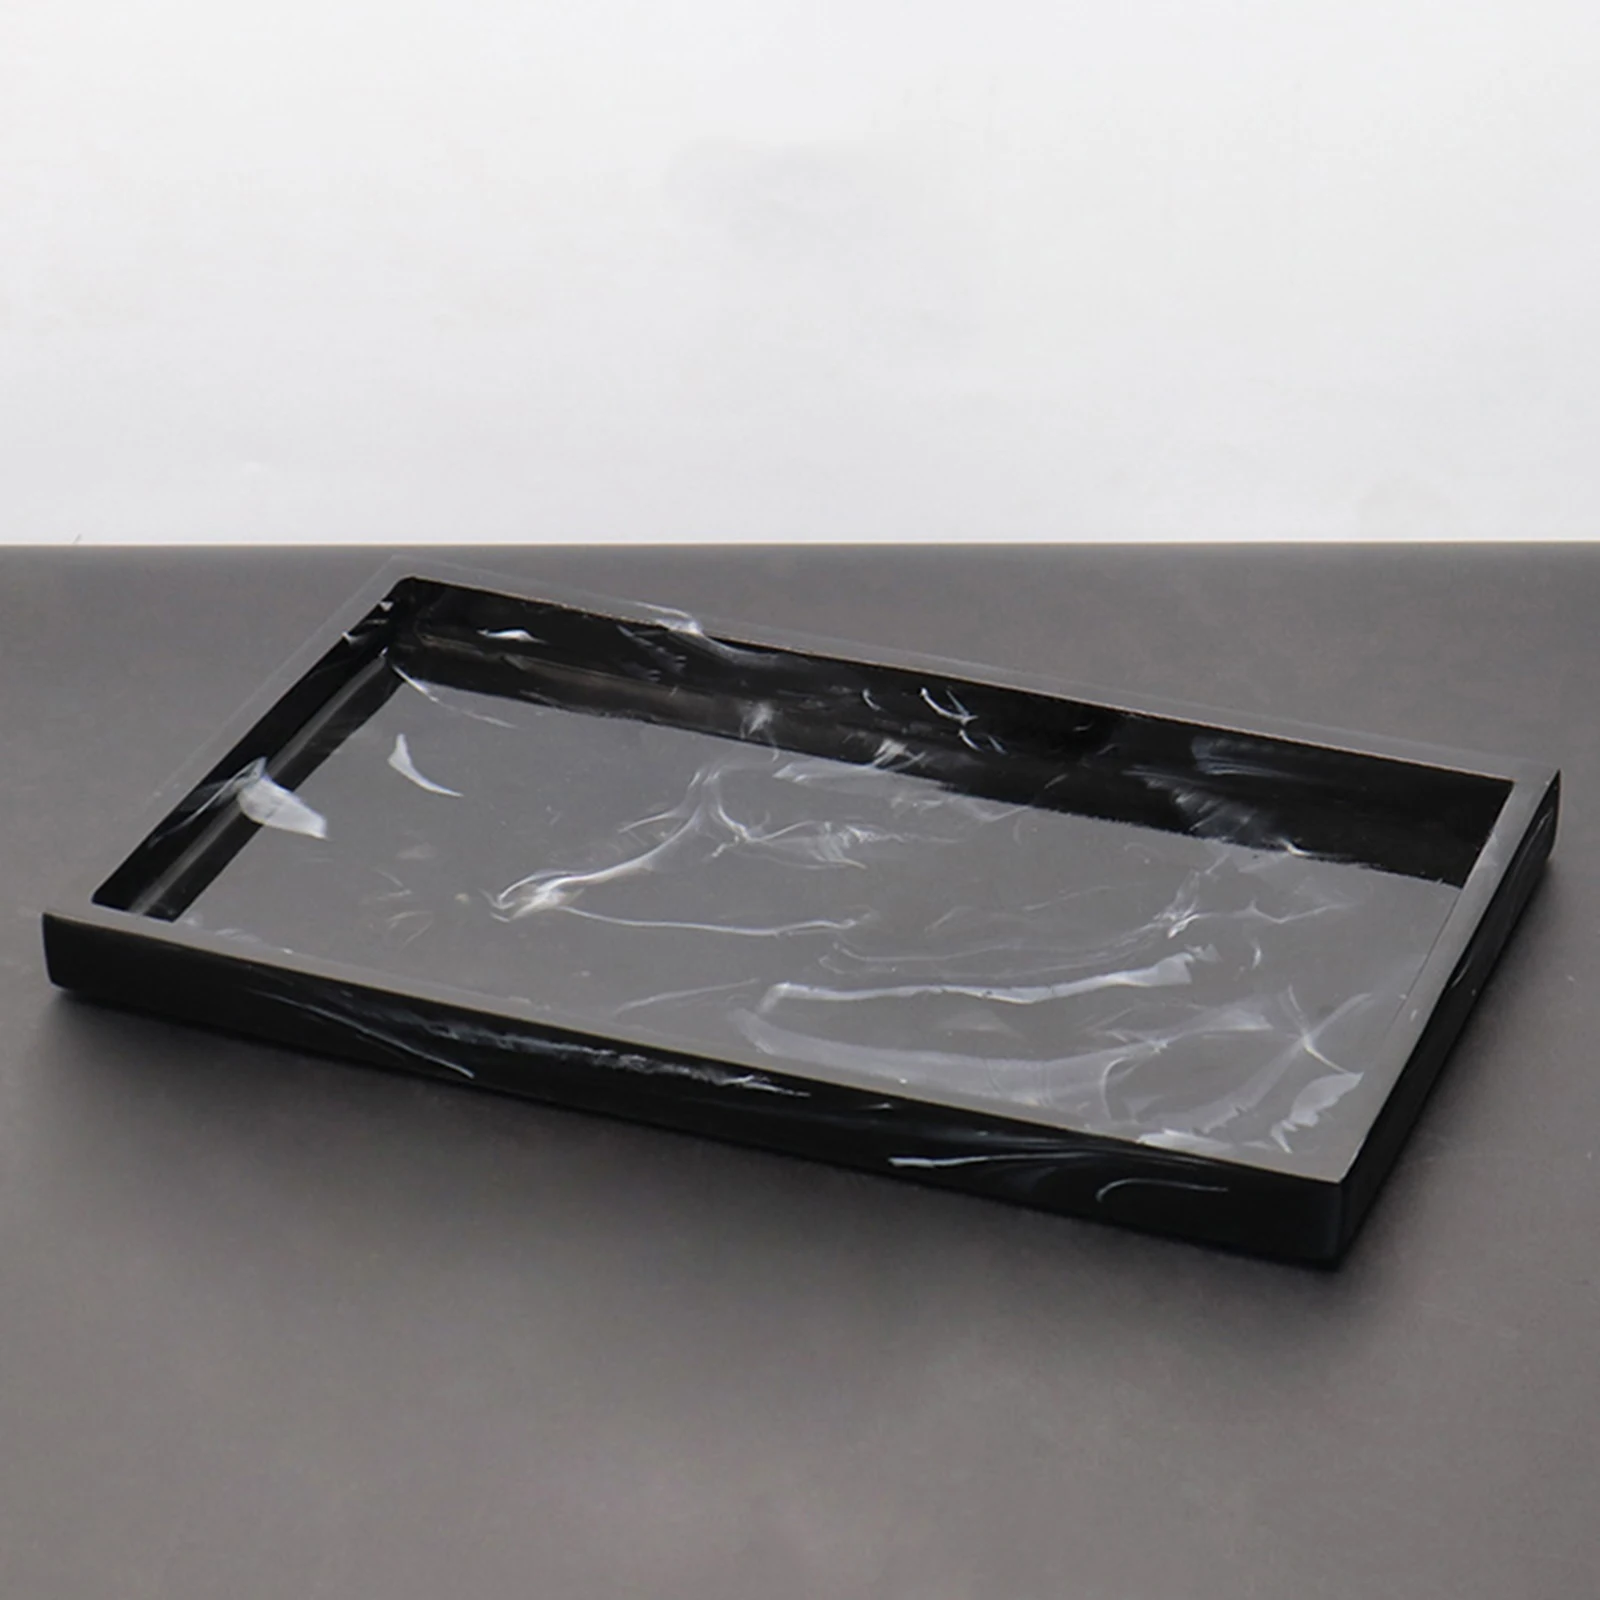 1x Nordic Resin Bathtub Tray Countertop Dispenser for Jewelry Candles Soap